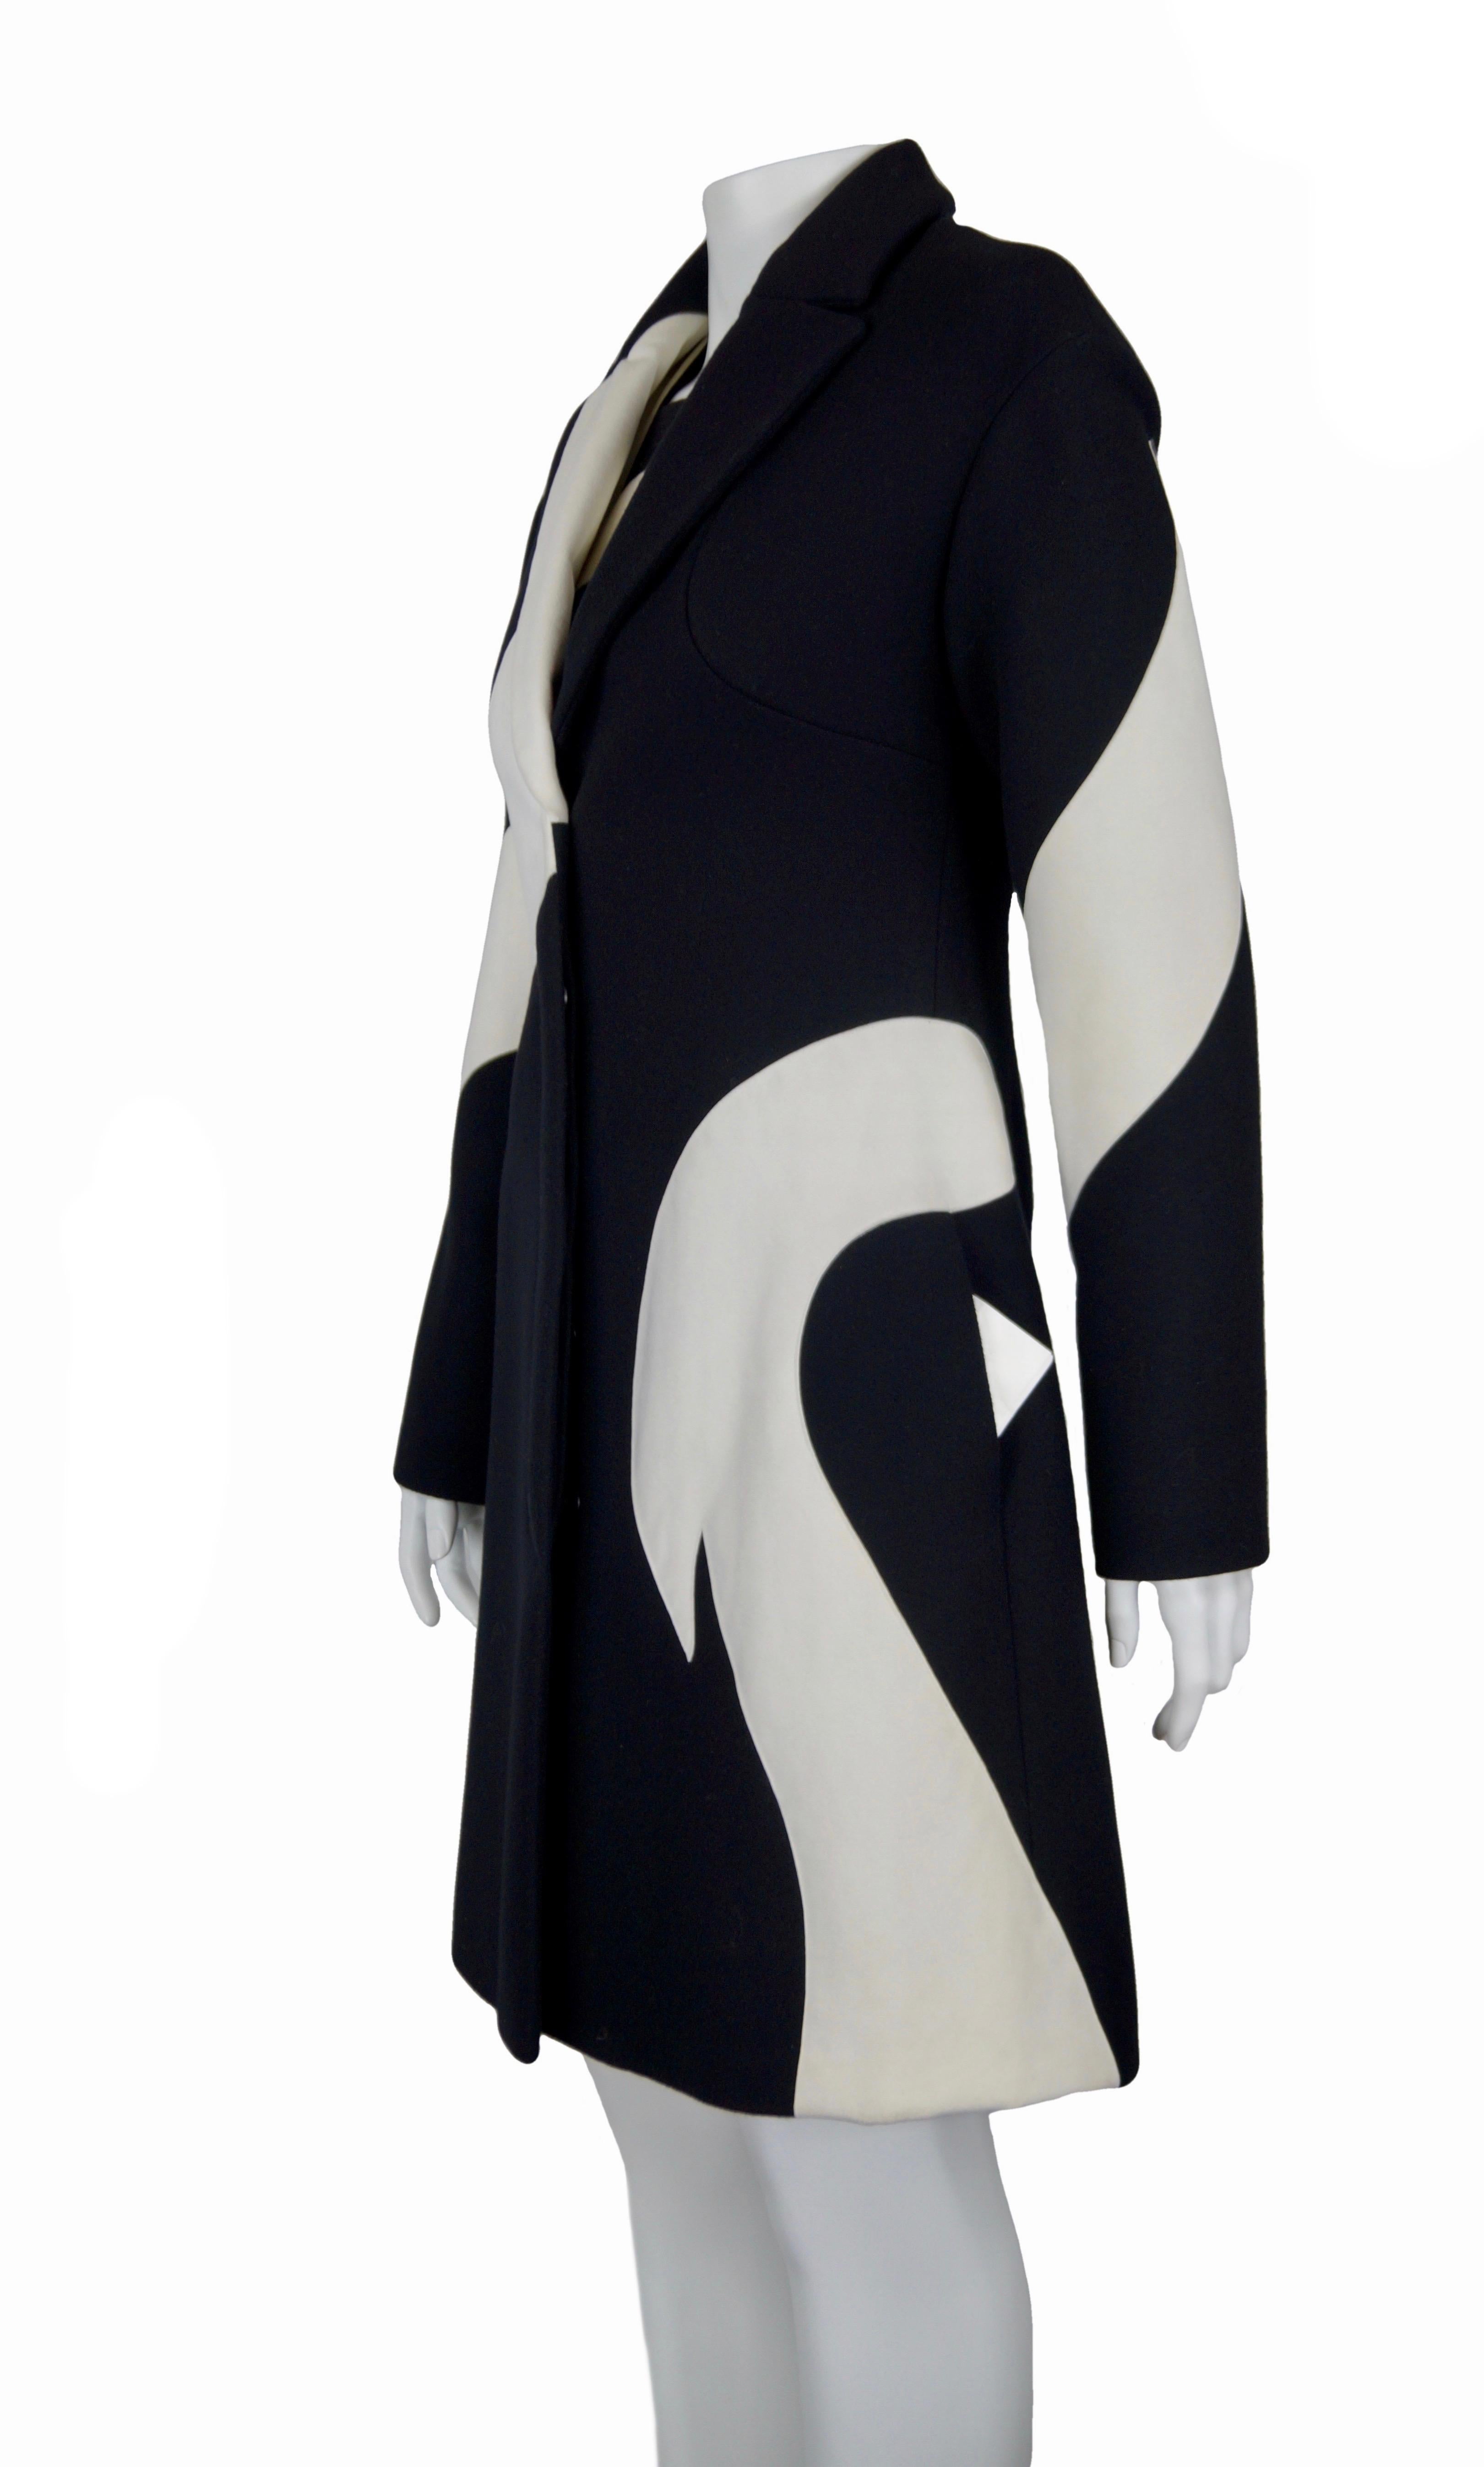 Women's VERSACE coat and dress black and white F/W 2011 For Sale